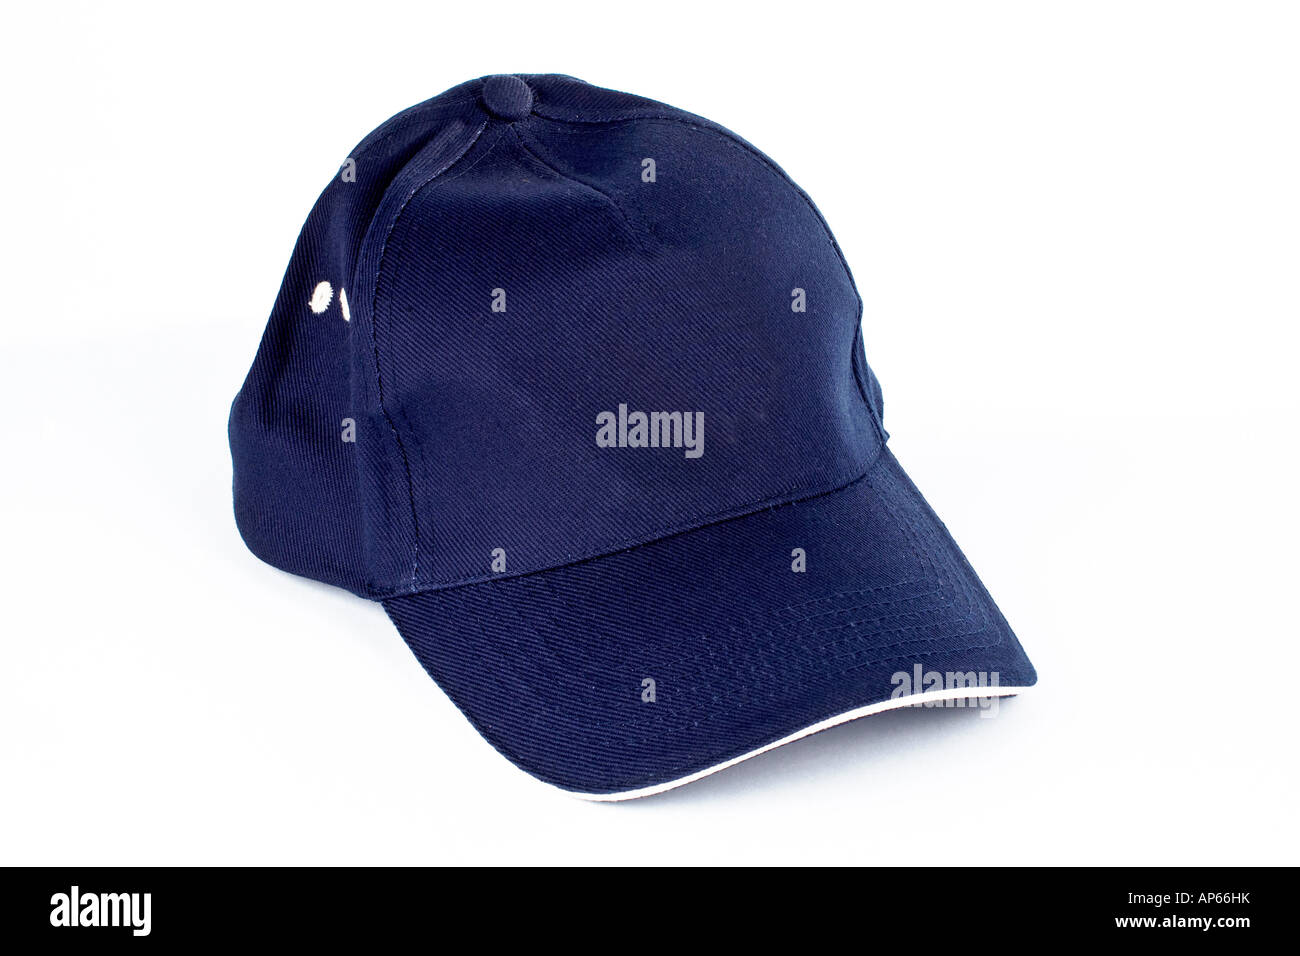 Mesh Alamy cap photography images and stock hi-res -